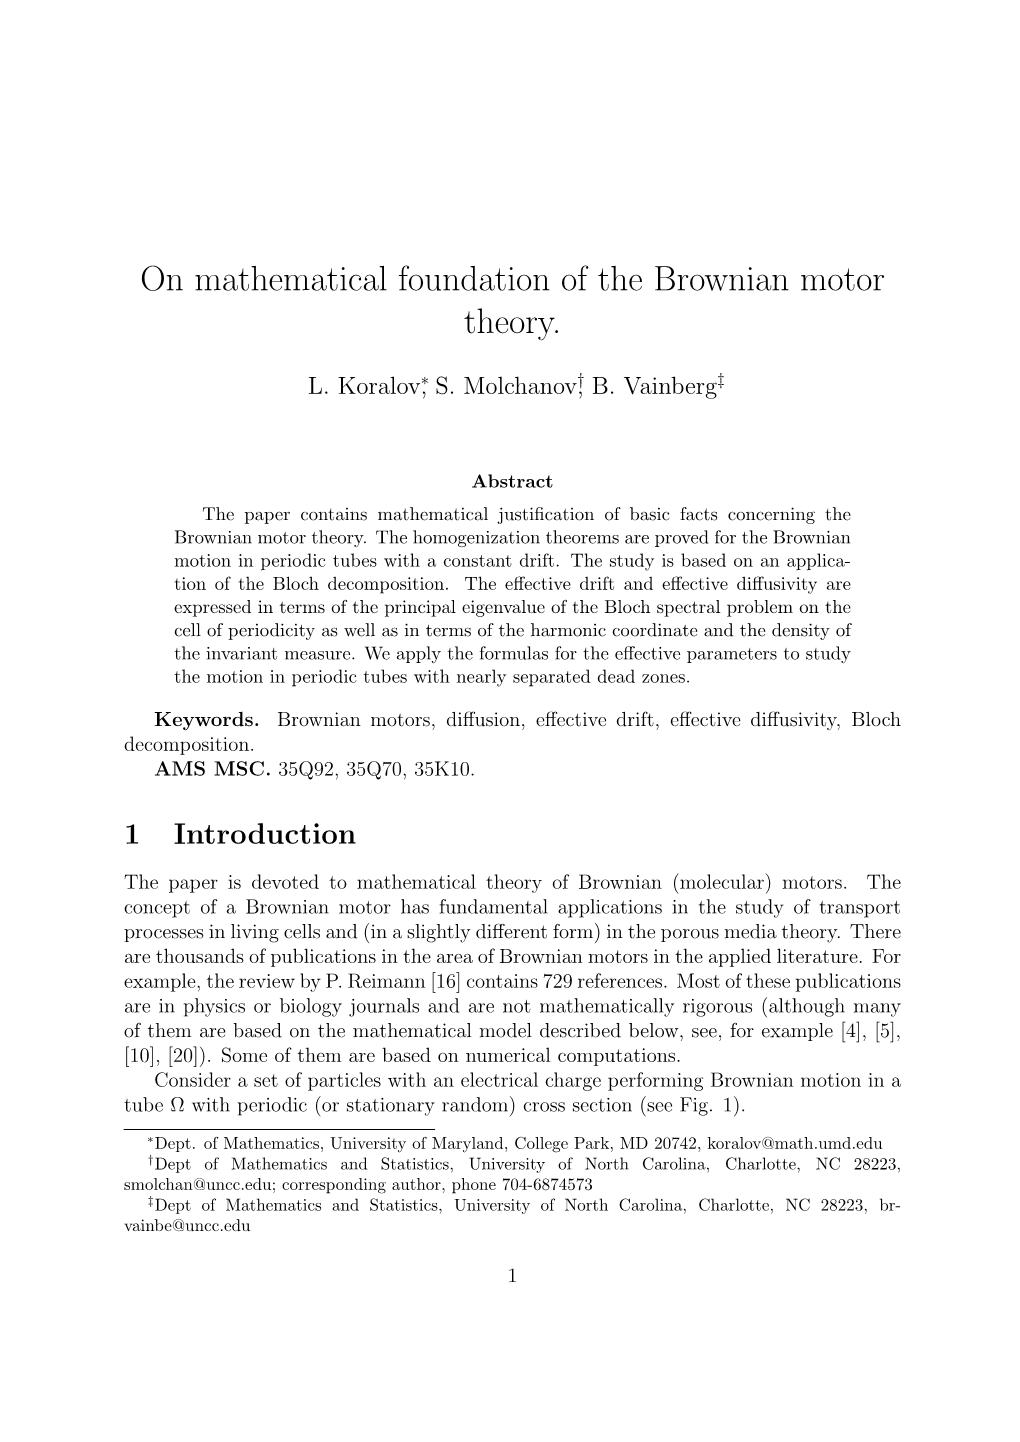 On Mathematical Foundation of the Brownian Motor Theory